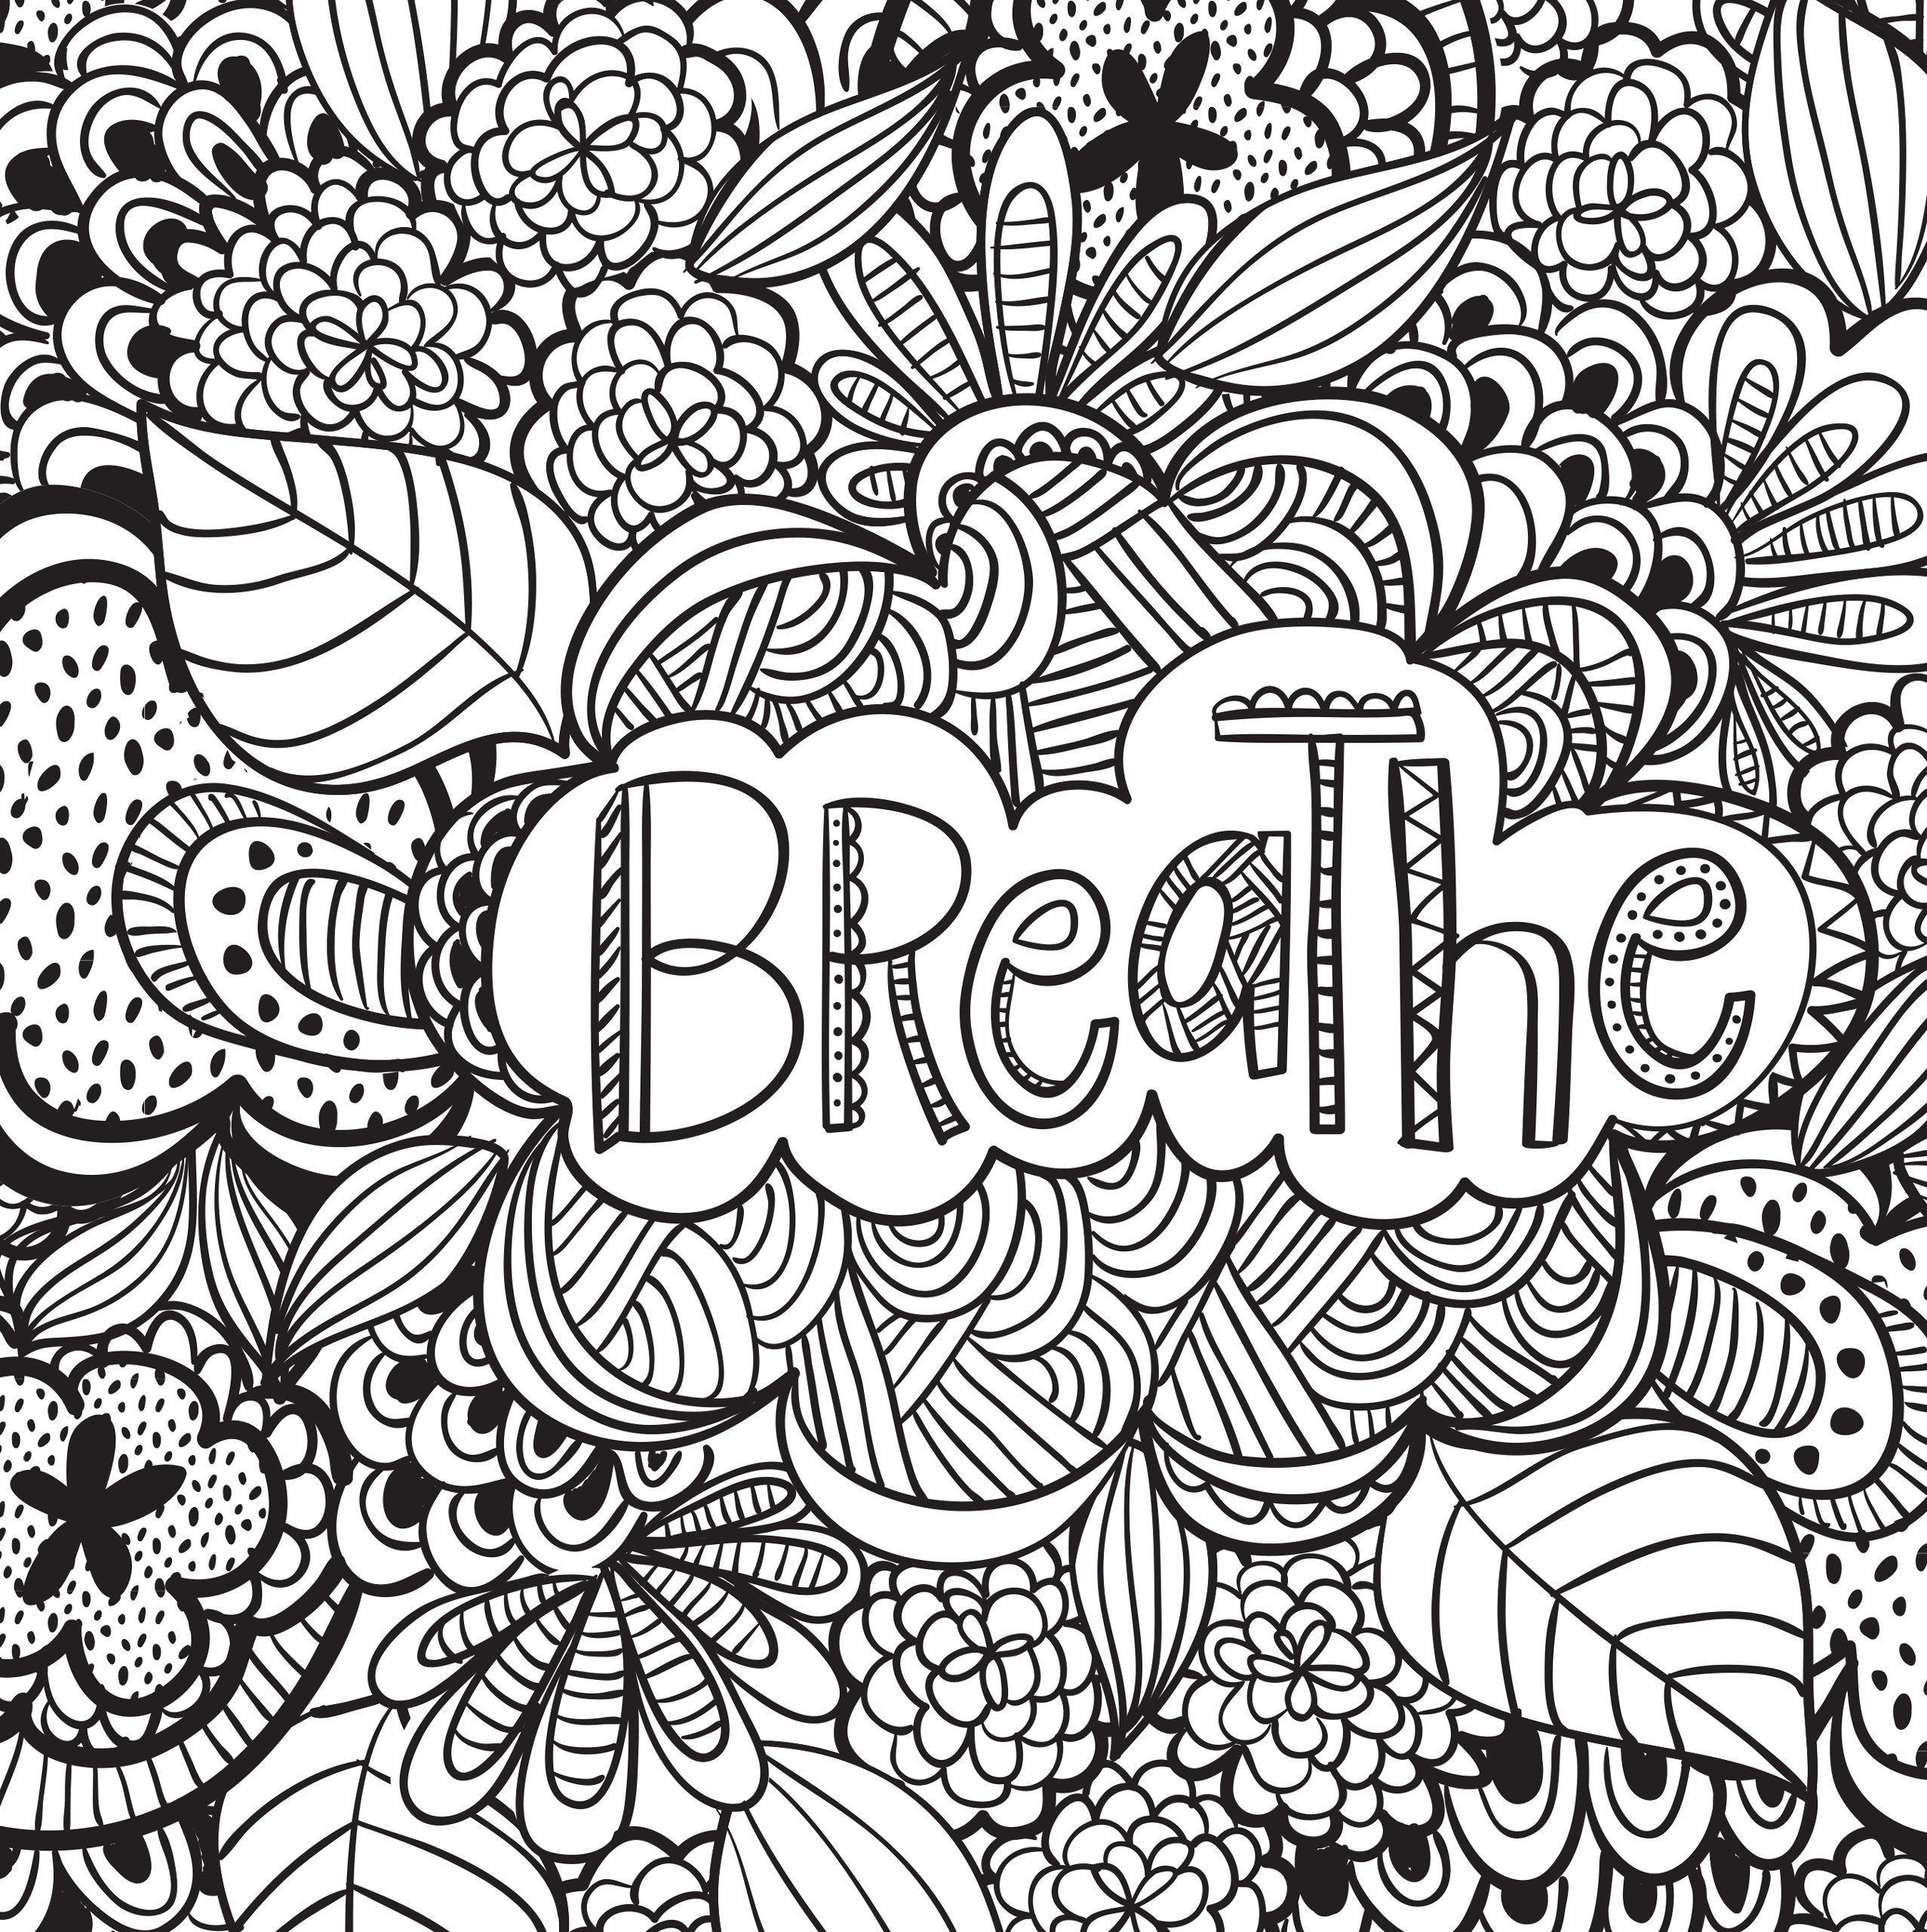 Inspirational Coloring Pages For Kids
 Joyful Inspiration Adult Coloring Book 31 stress